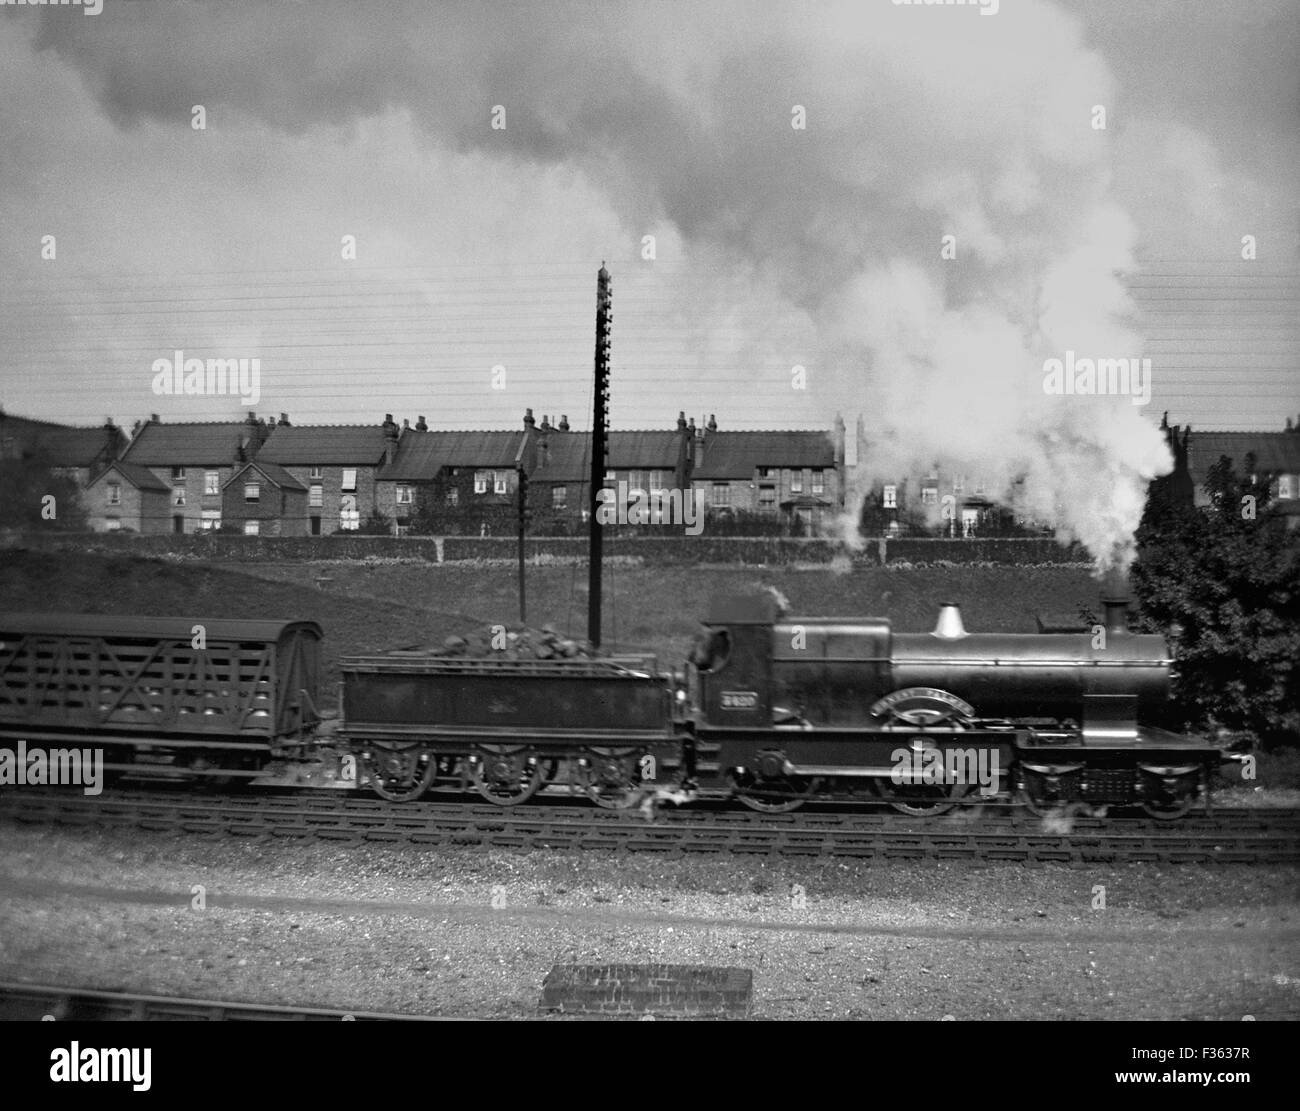 AJAXNETPHOTO - 1911 - 12 APPROX - SUBURBAN PUFFER - THE HENRY PALMER STEAM ENGINE HAULING A GOODS TRAIN PASSING LONDON'S EXPANDING SUBURBIA IN THE EARLY 1900S. PHOTO:AJAX VINTAGE PICTURE LIBRARY REF:()TRA TRAIN 1900S 80201 21 Stock Photo